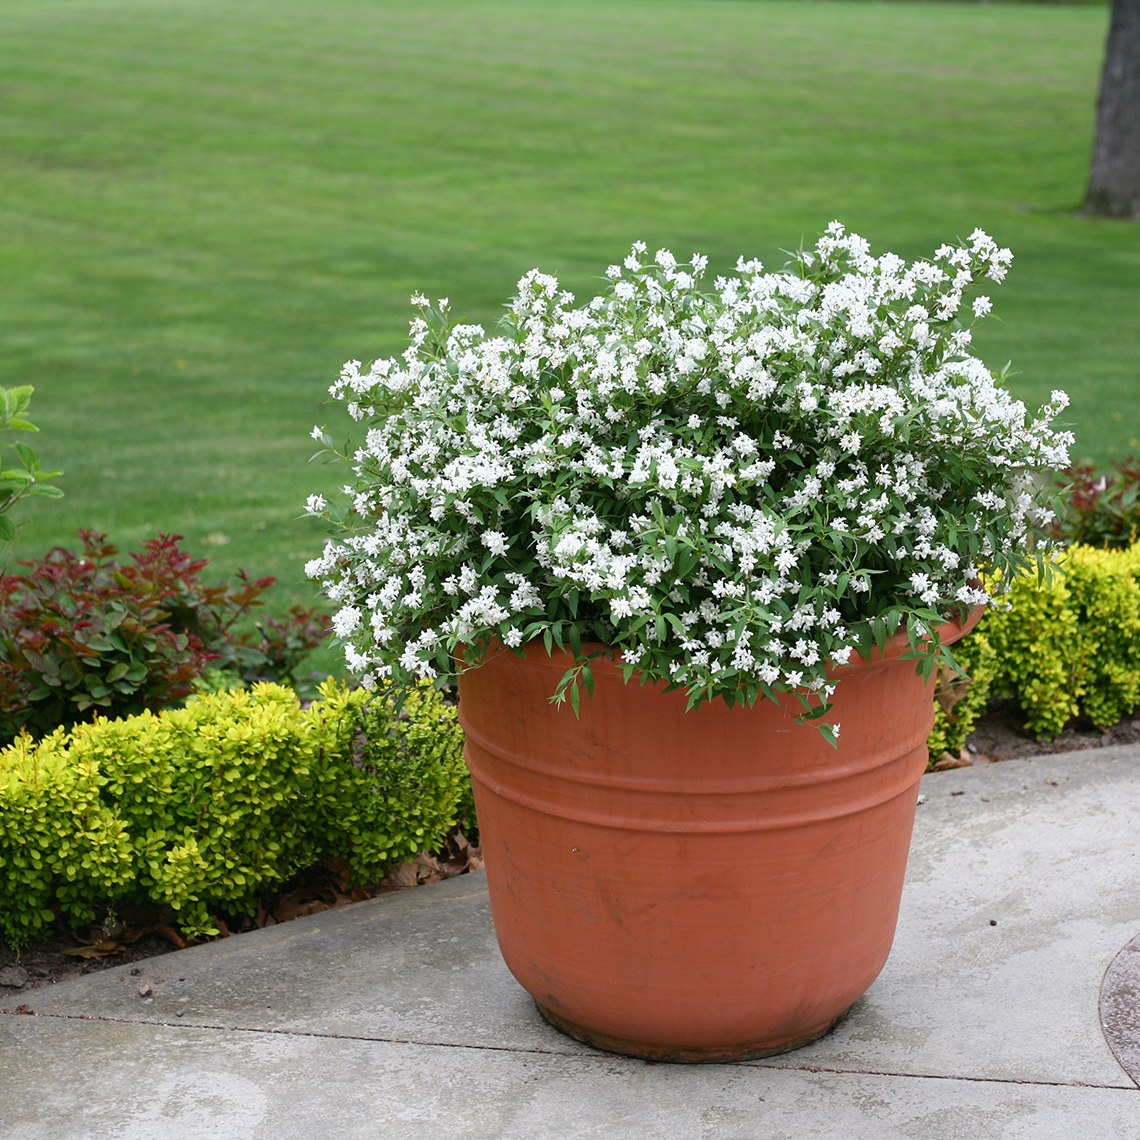 Yuki Snowflake Deutzia blooming in a container on a patio